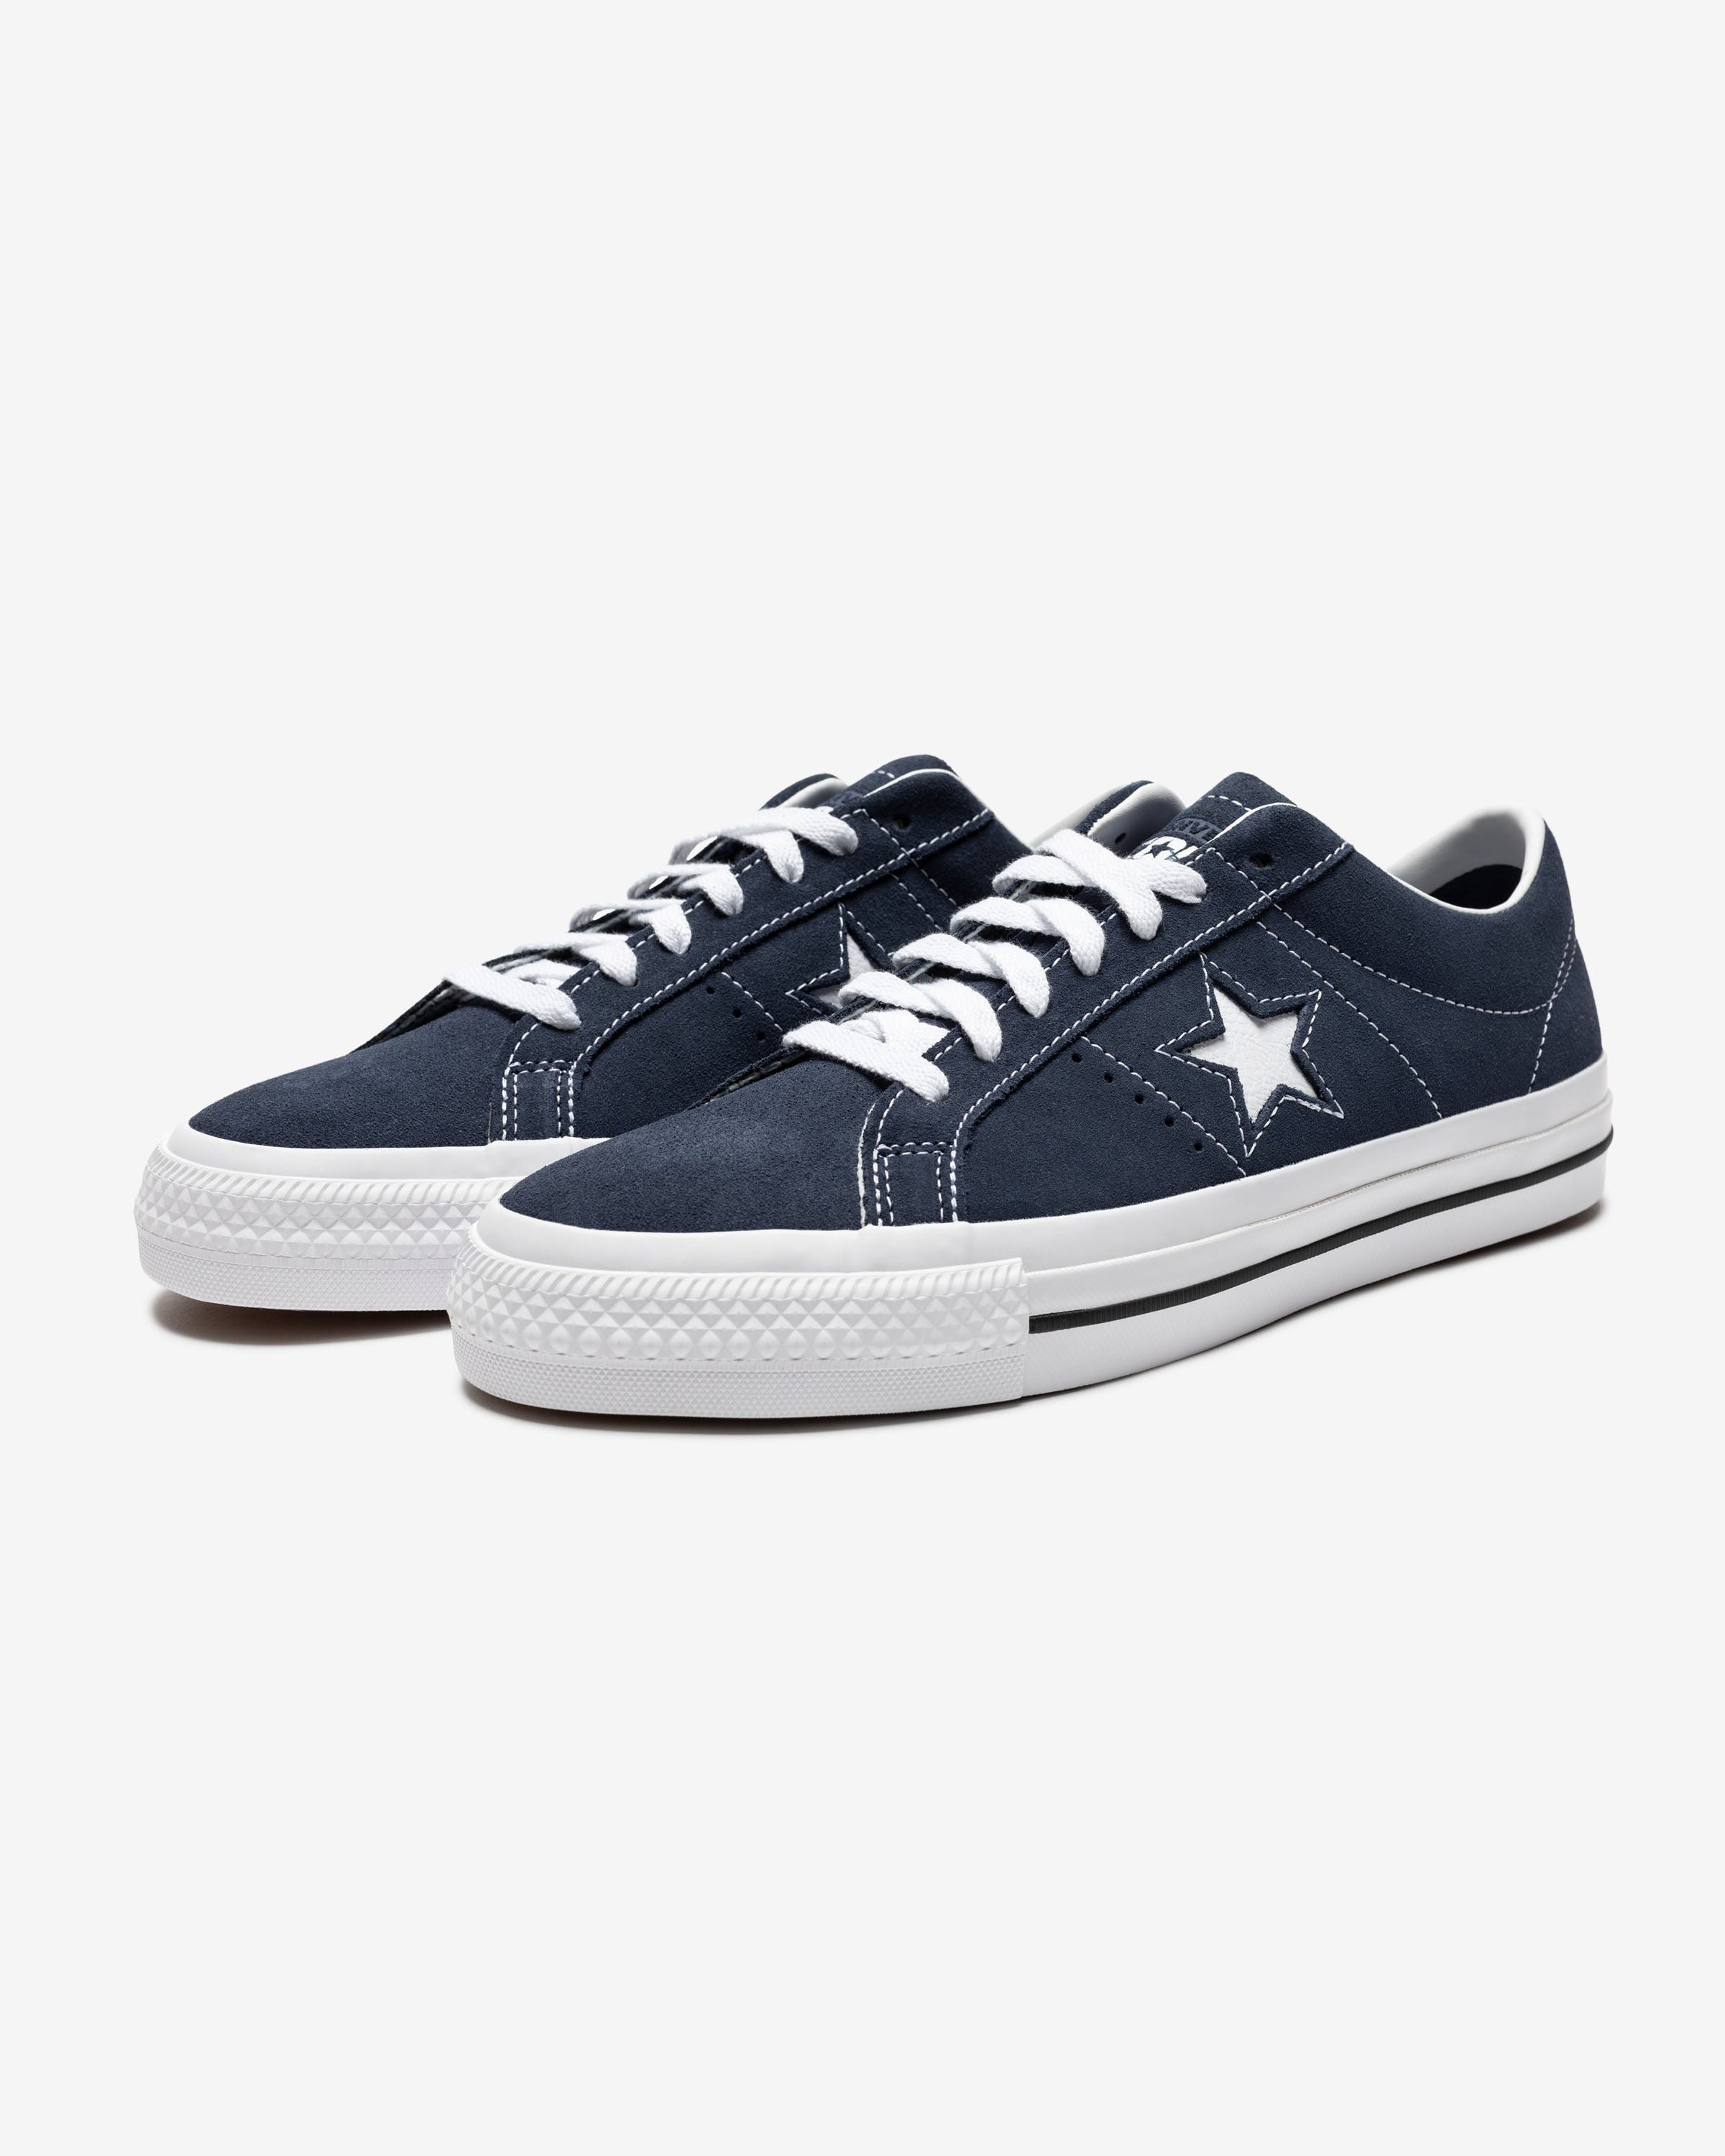 CONVERSE ONE STAR OX - NAVY/ BLACK – Undefeated